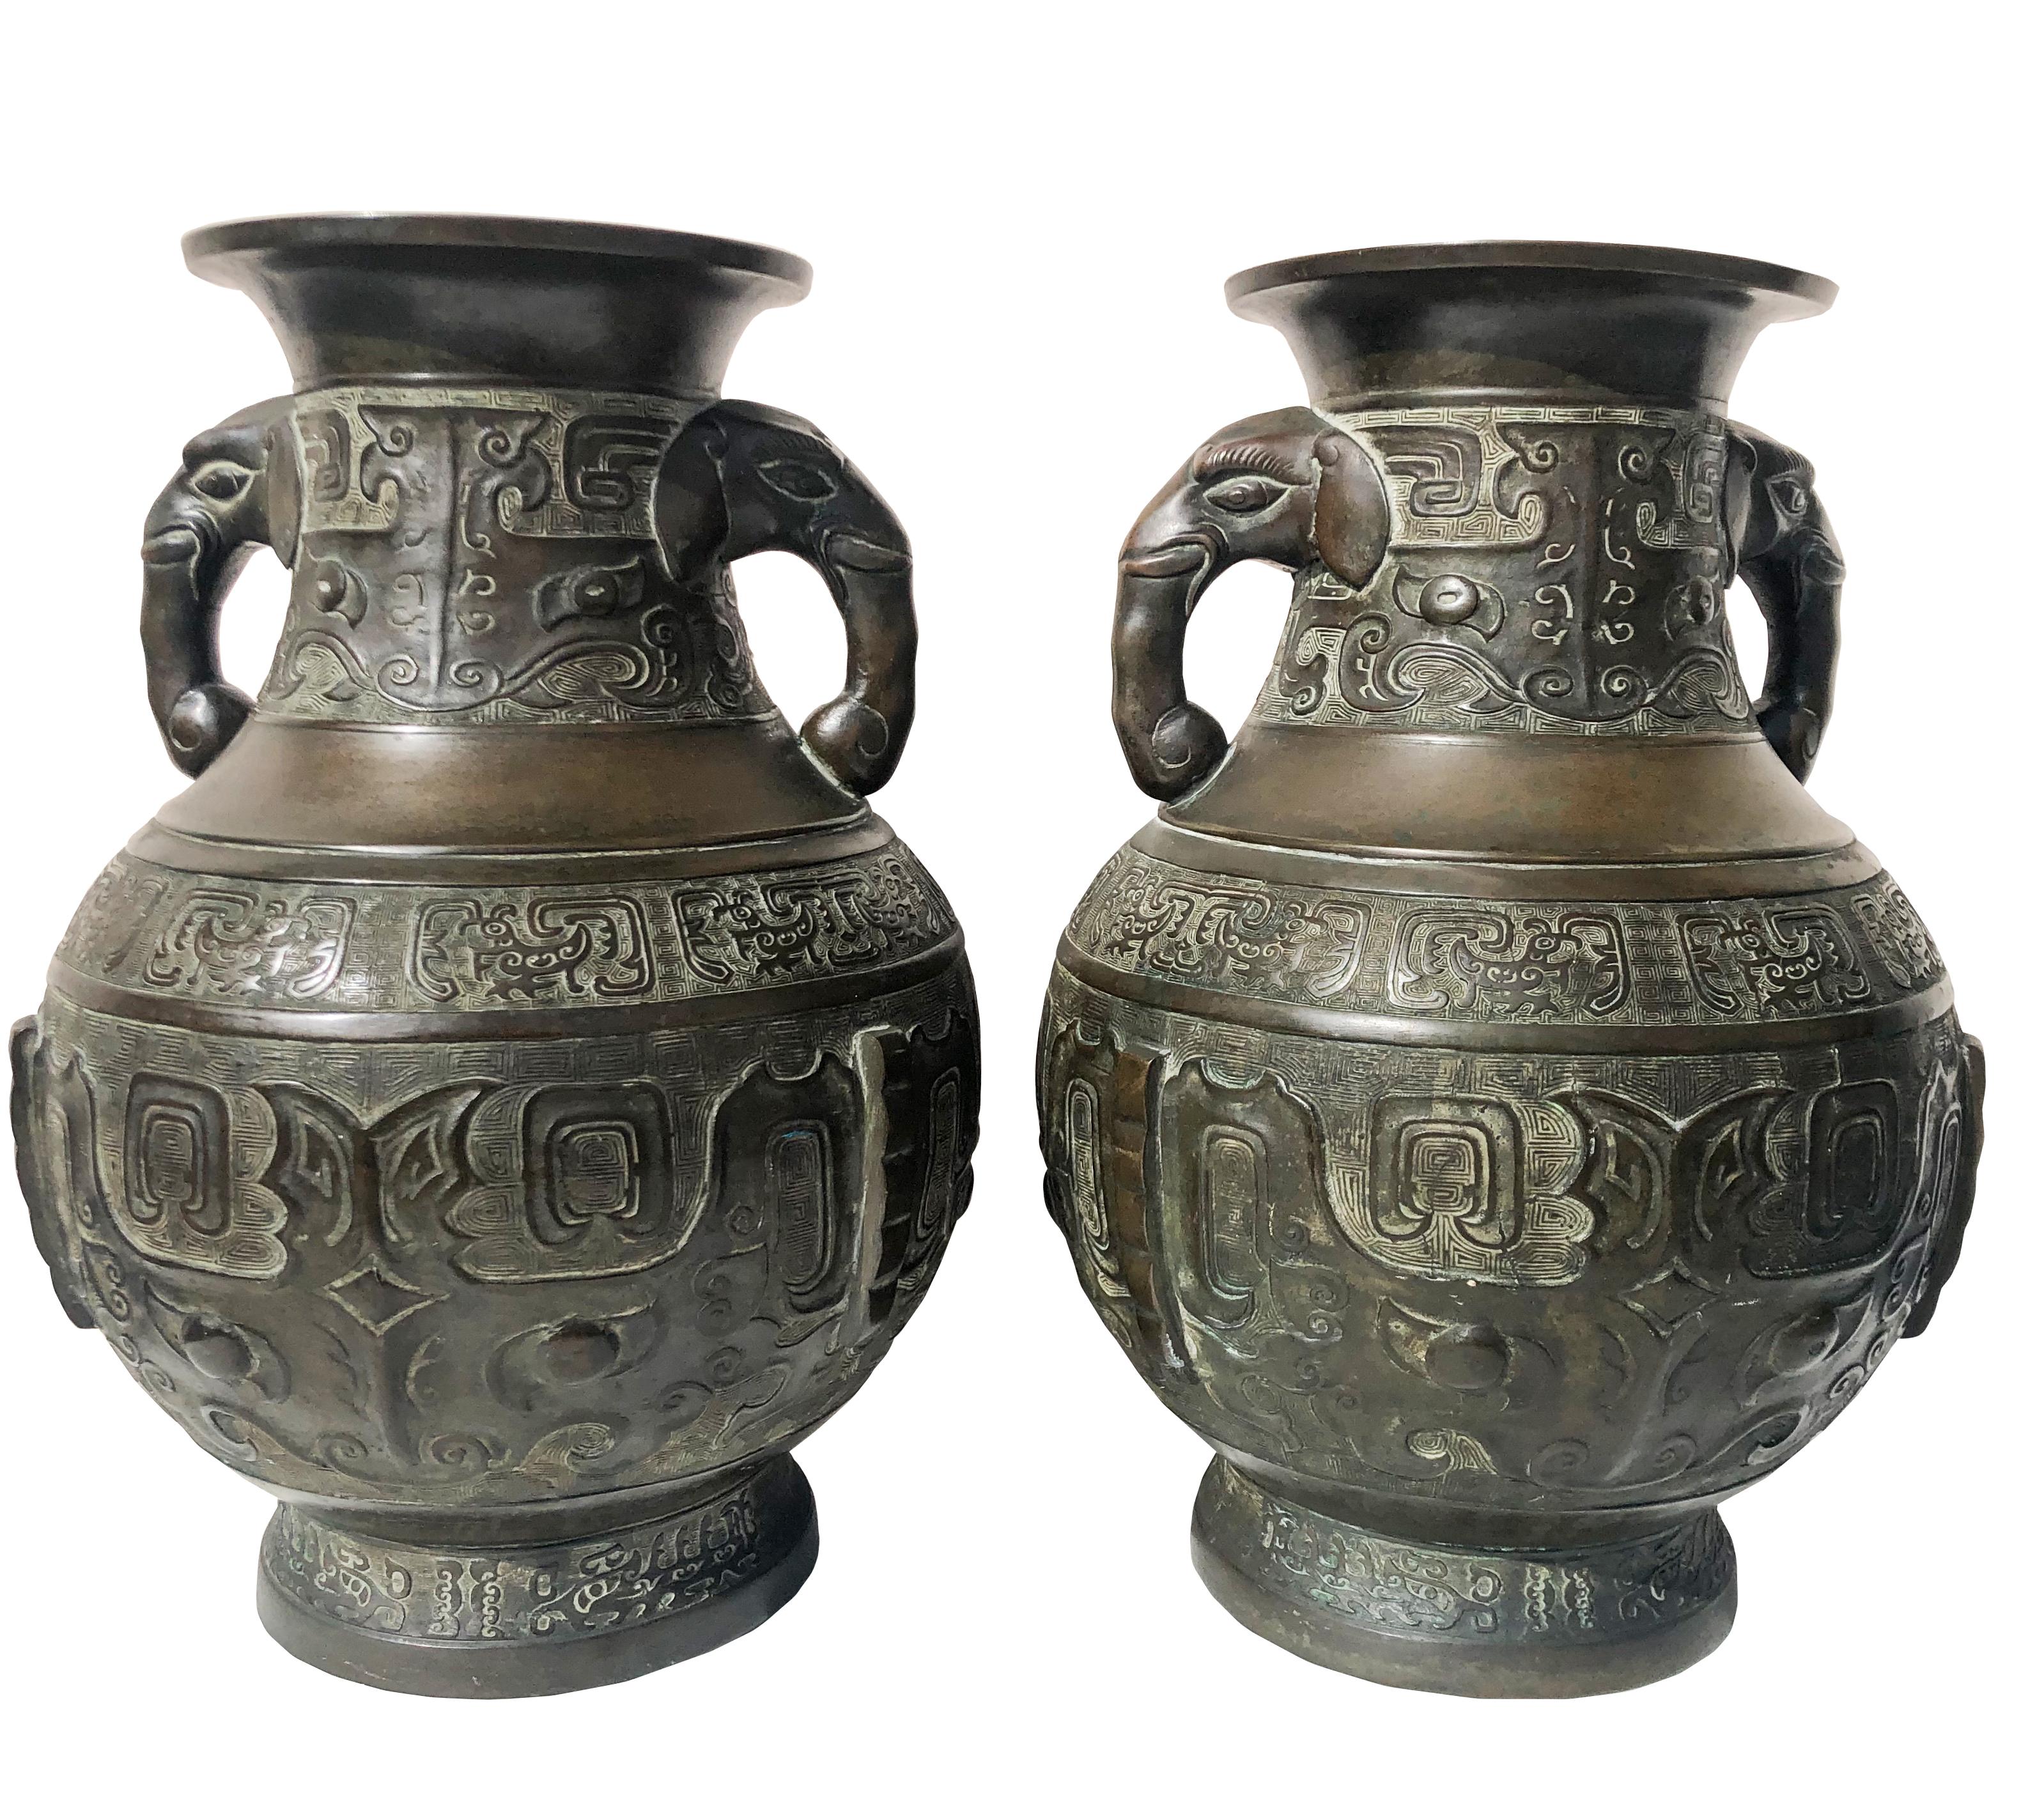  Pair of Late 19th Century Japanese Bronze Vases  For Sale 2